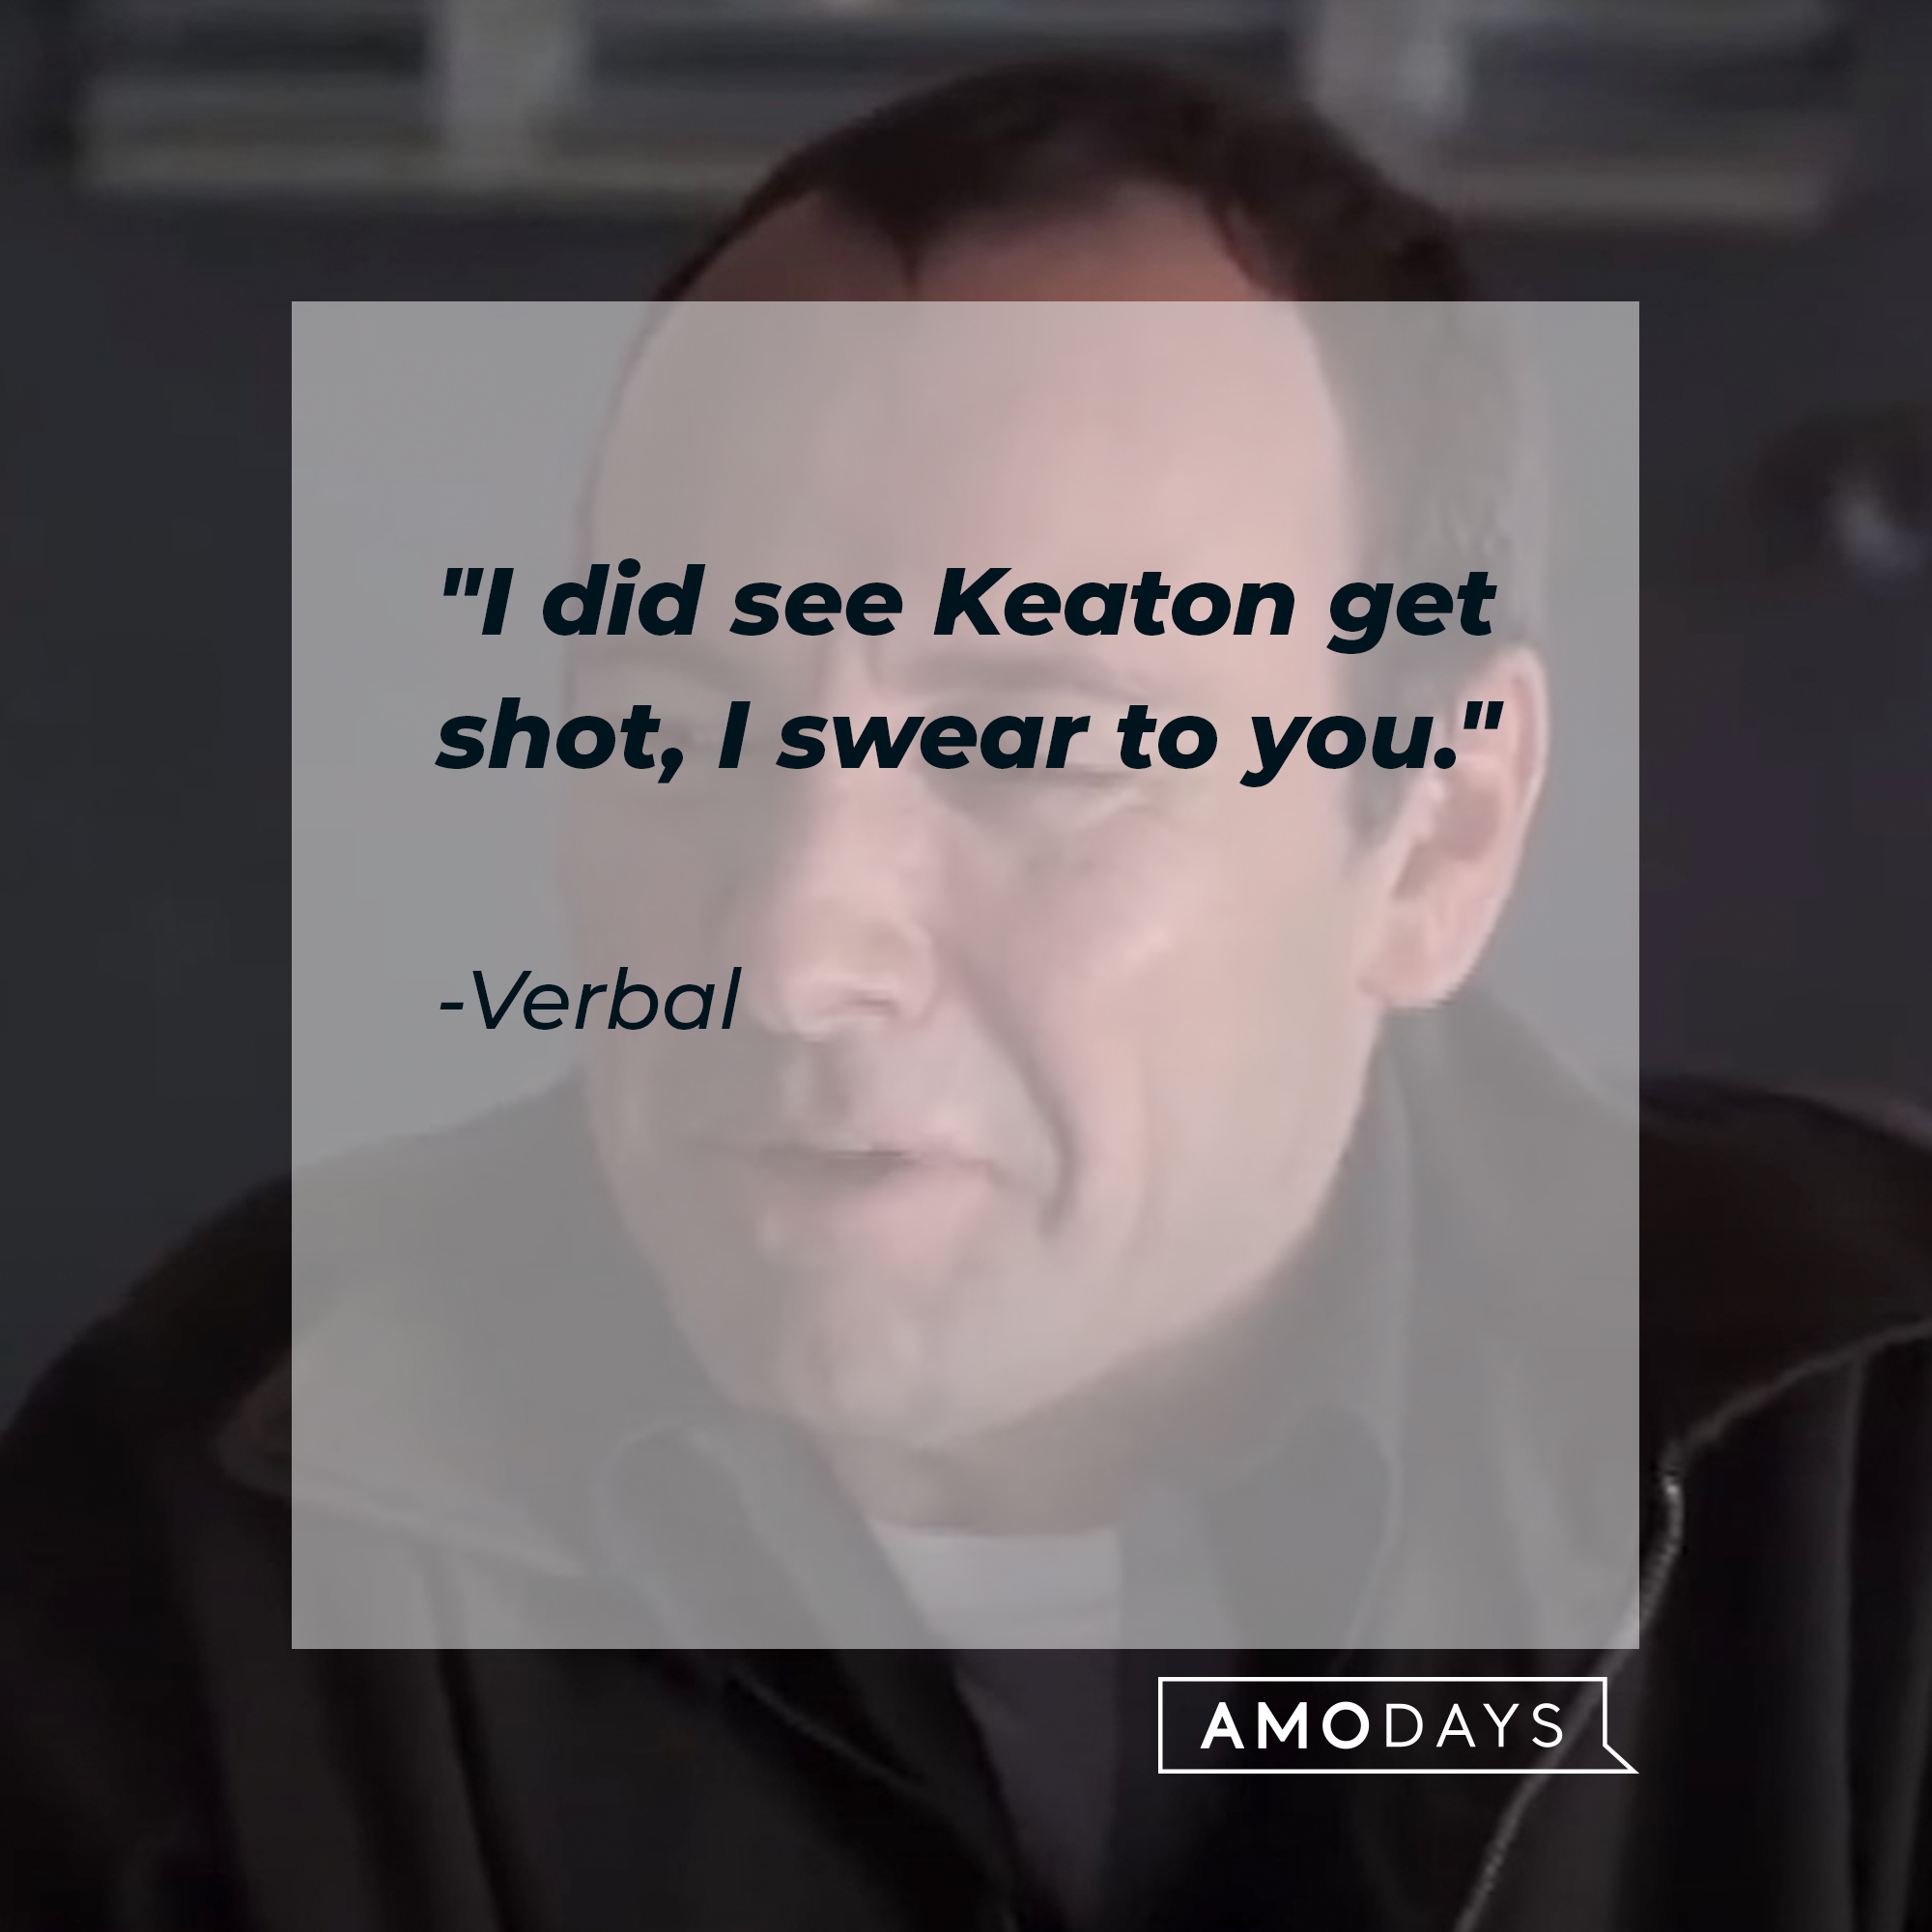 Verbal's quote: "I did see Keaton get shot, I swear to you." | Source: facebook.com/usualsuspectsmovie